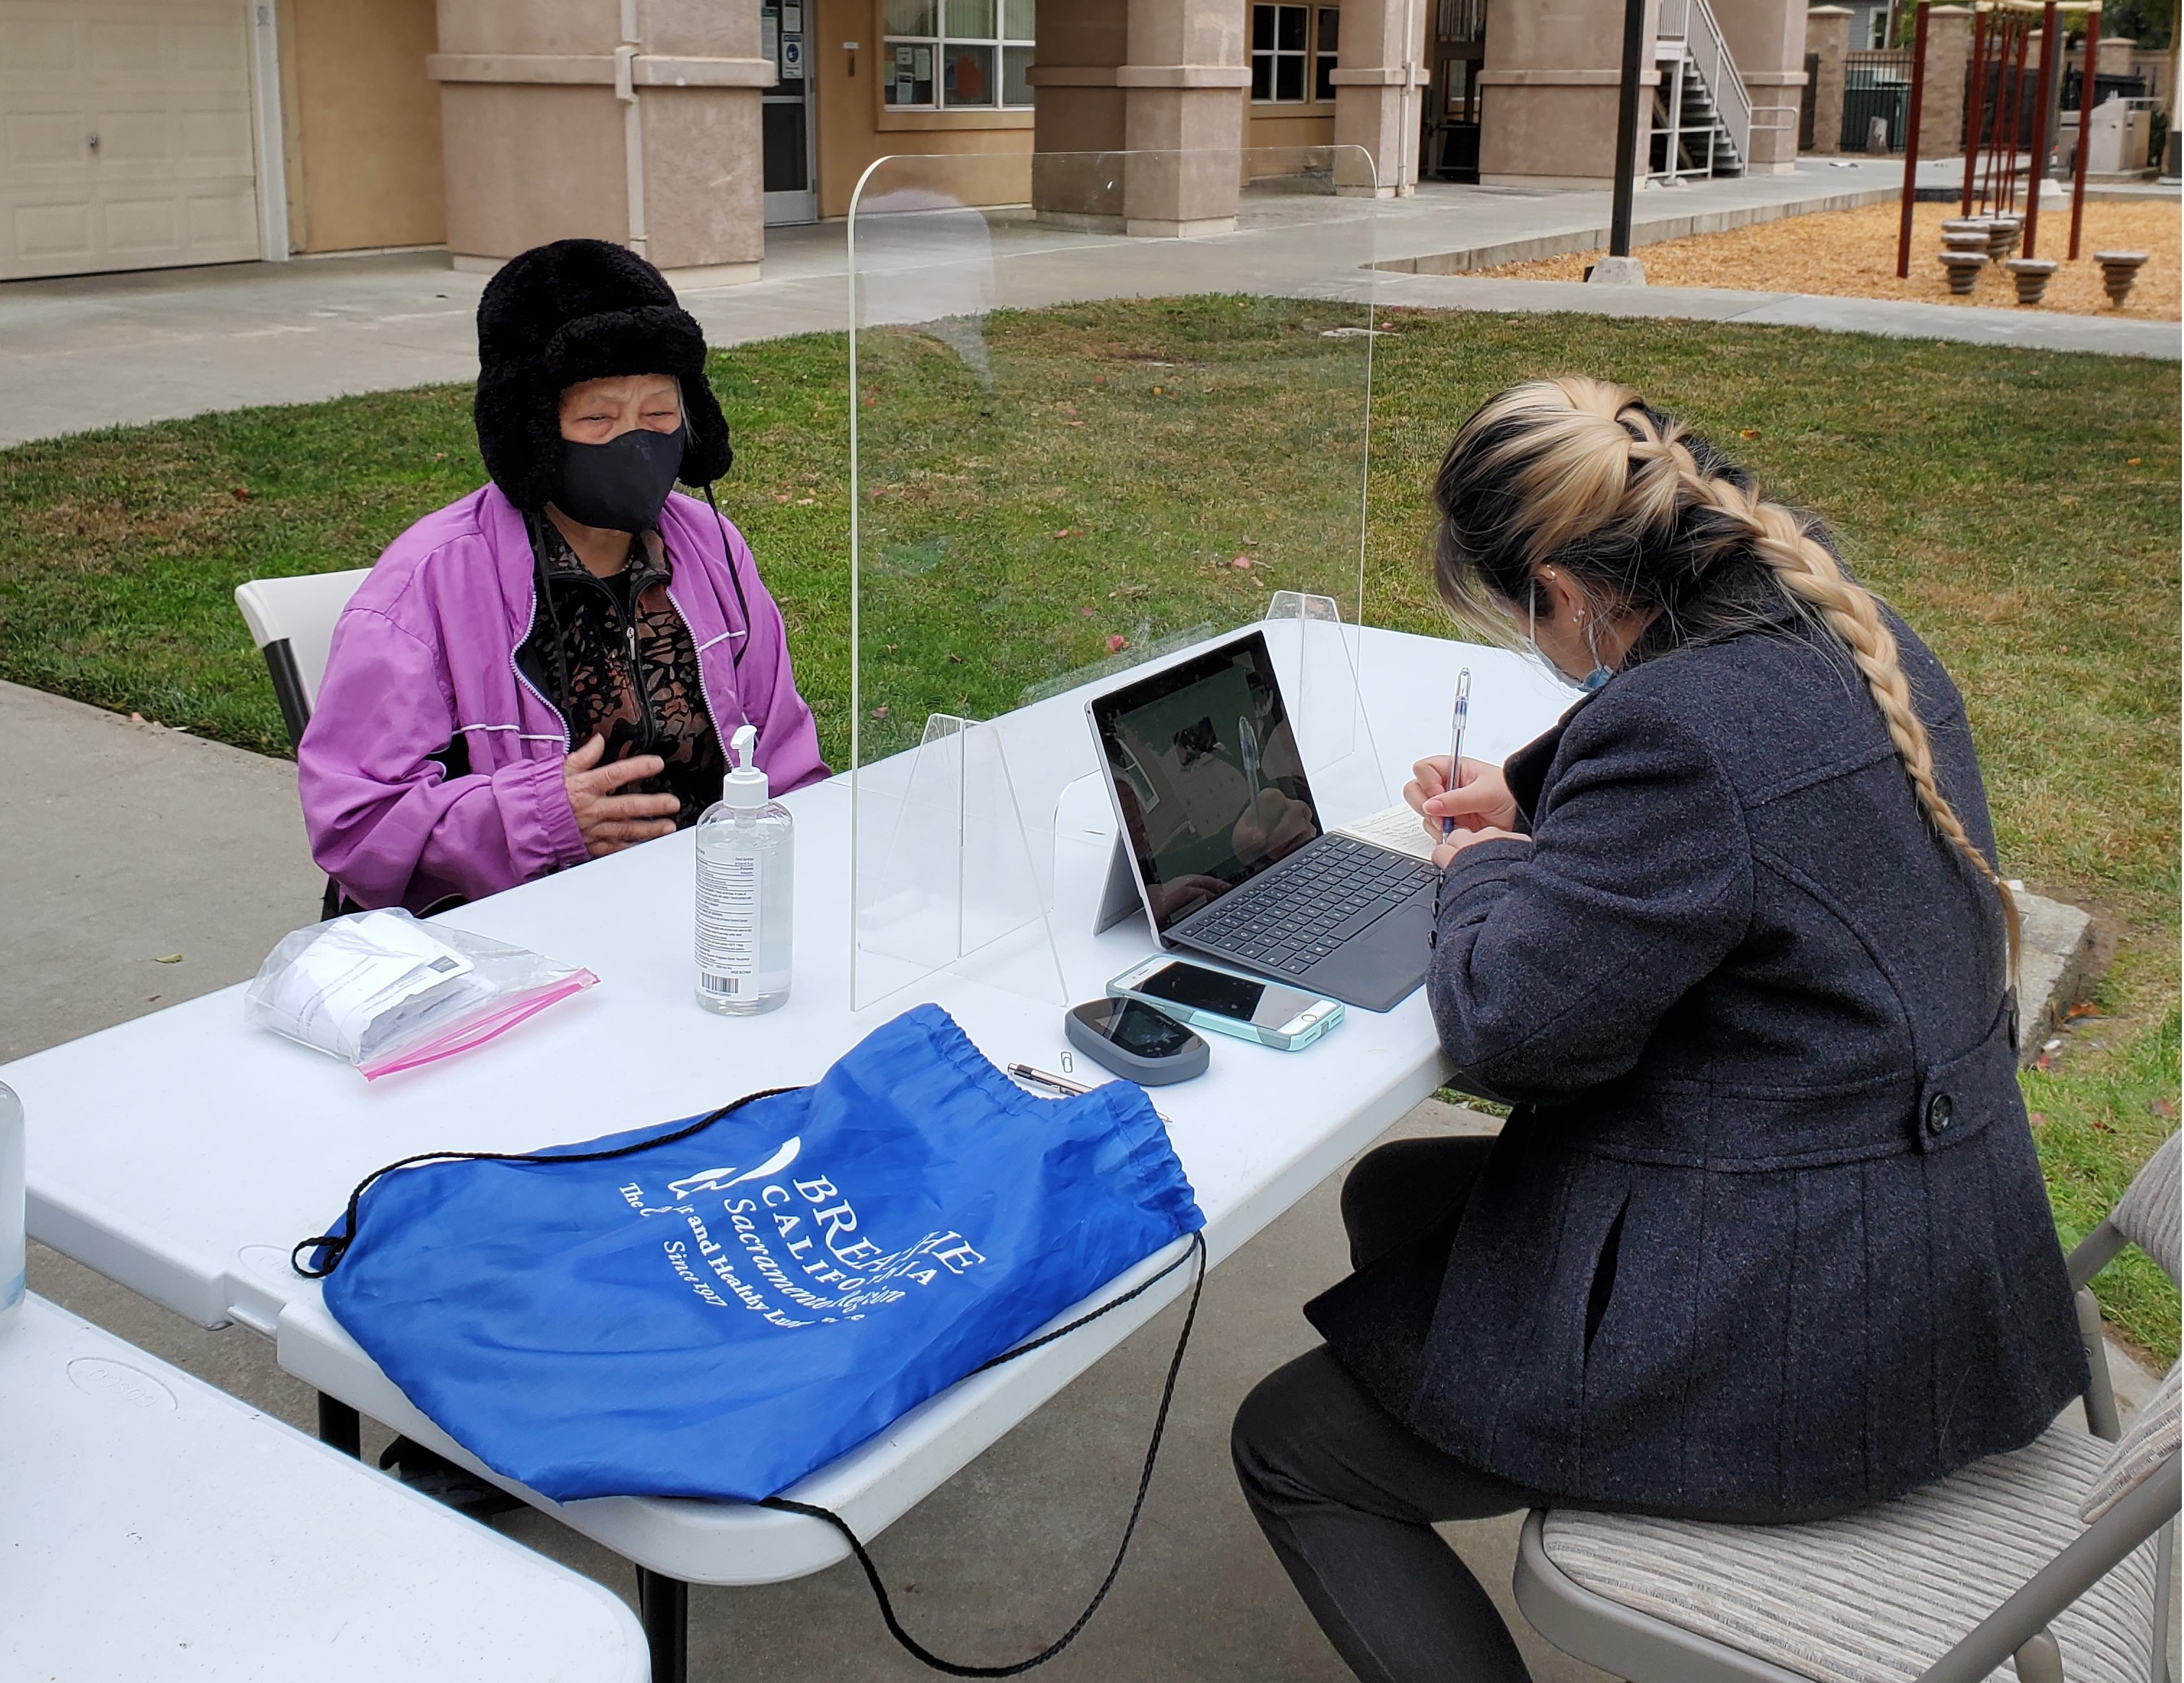 Carshare site outdoor outreach events, two women talking at table with plexi glass barrier. Women are wearing face coverings as a COVID precaution. 